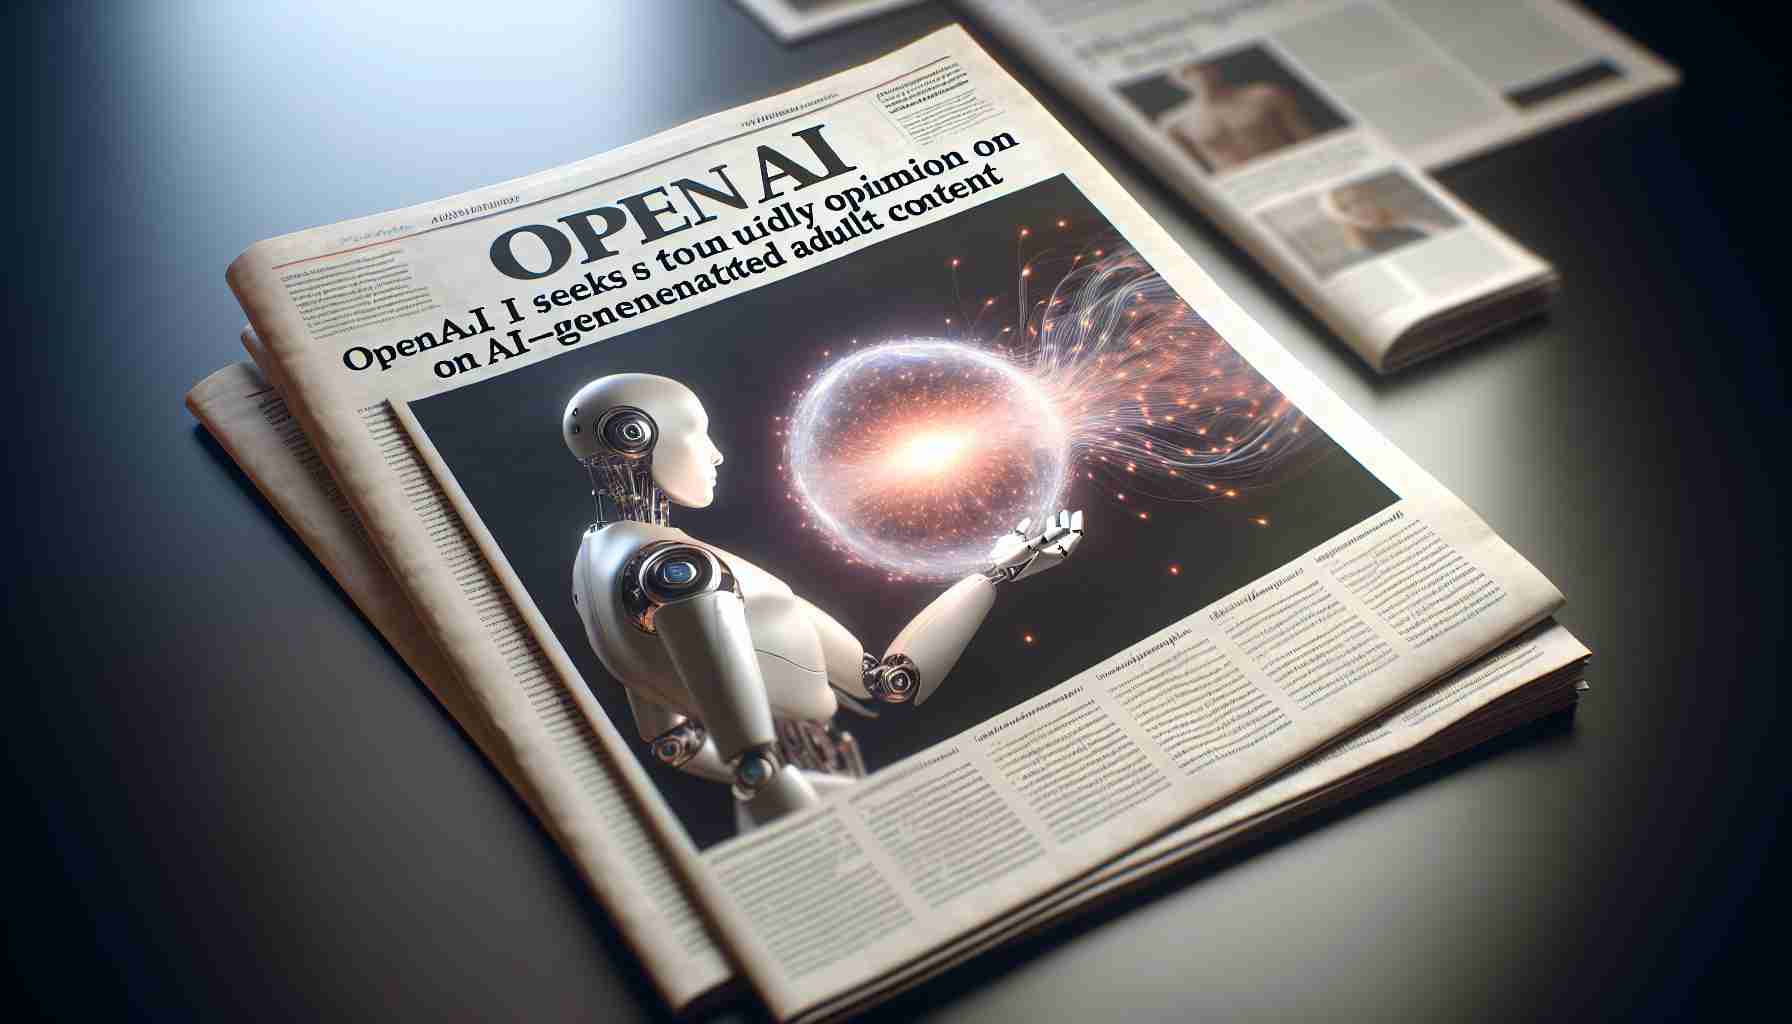 OpenAI Seeks Public Opinion on AI-Generated Adult Content